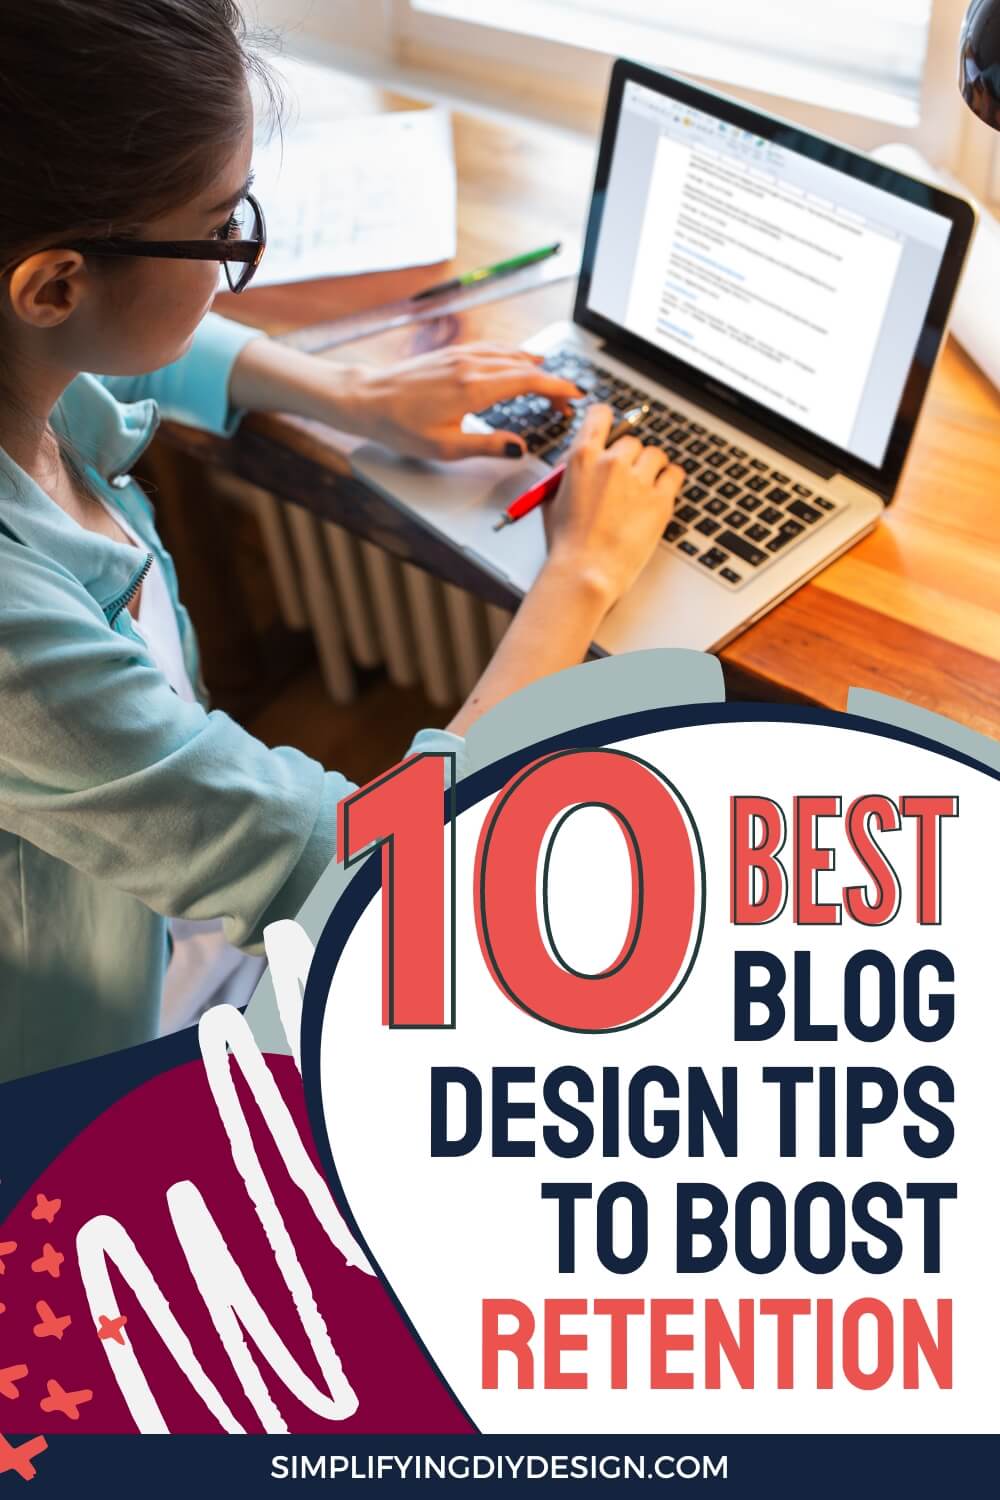 Taking your blog full-time is much easier when you have a well-designed blog. Get that pro blogger look by implementing these top 10 blog design tips!